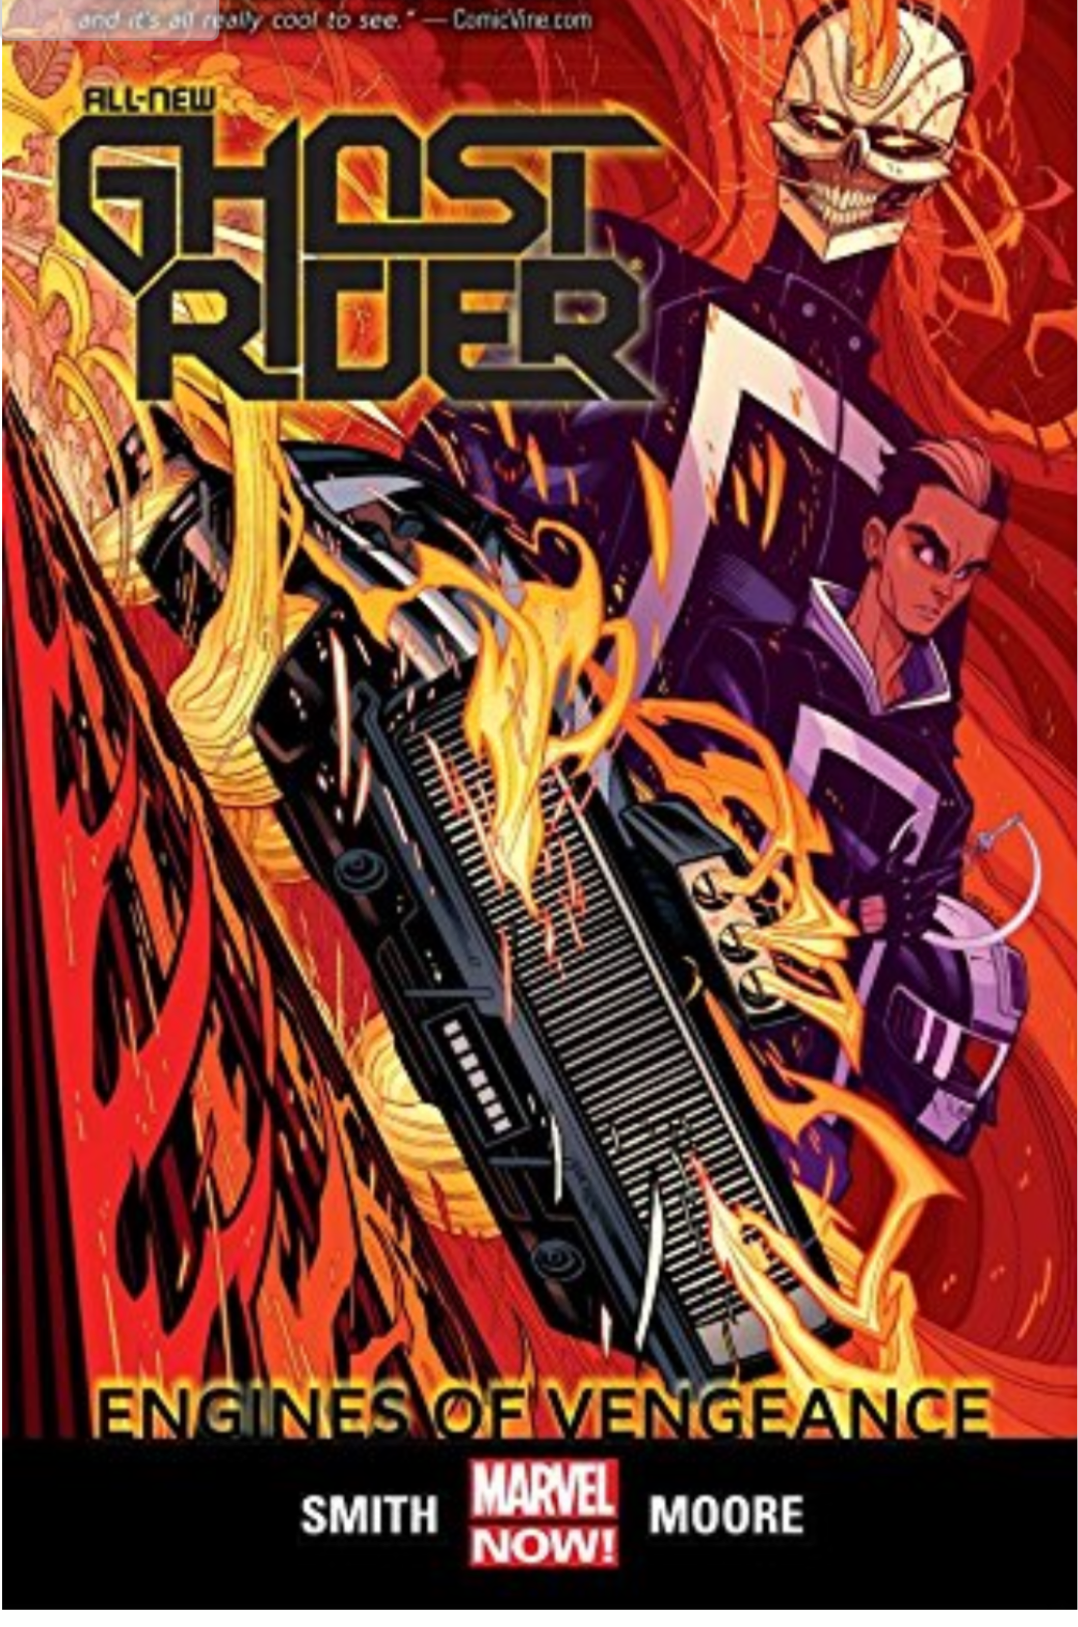 All New Ghost Rider Vol 1 Engines of Vengeance